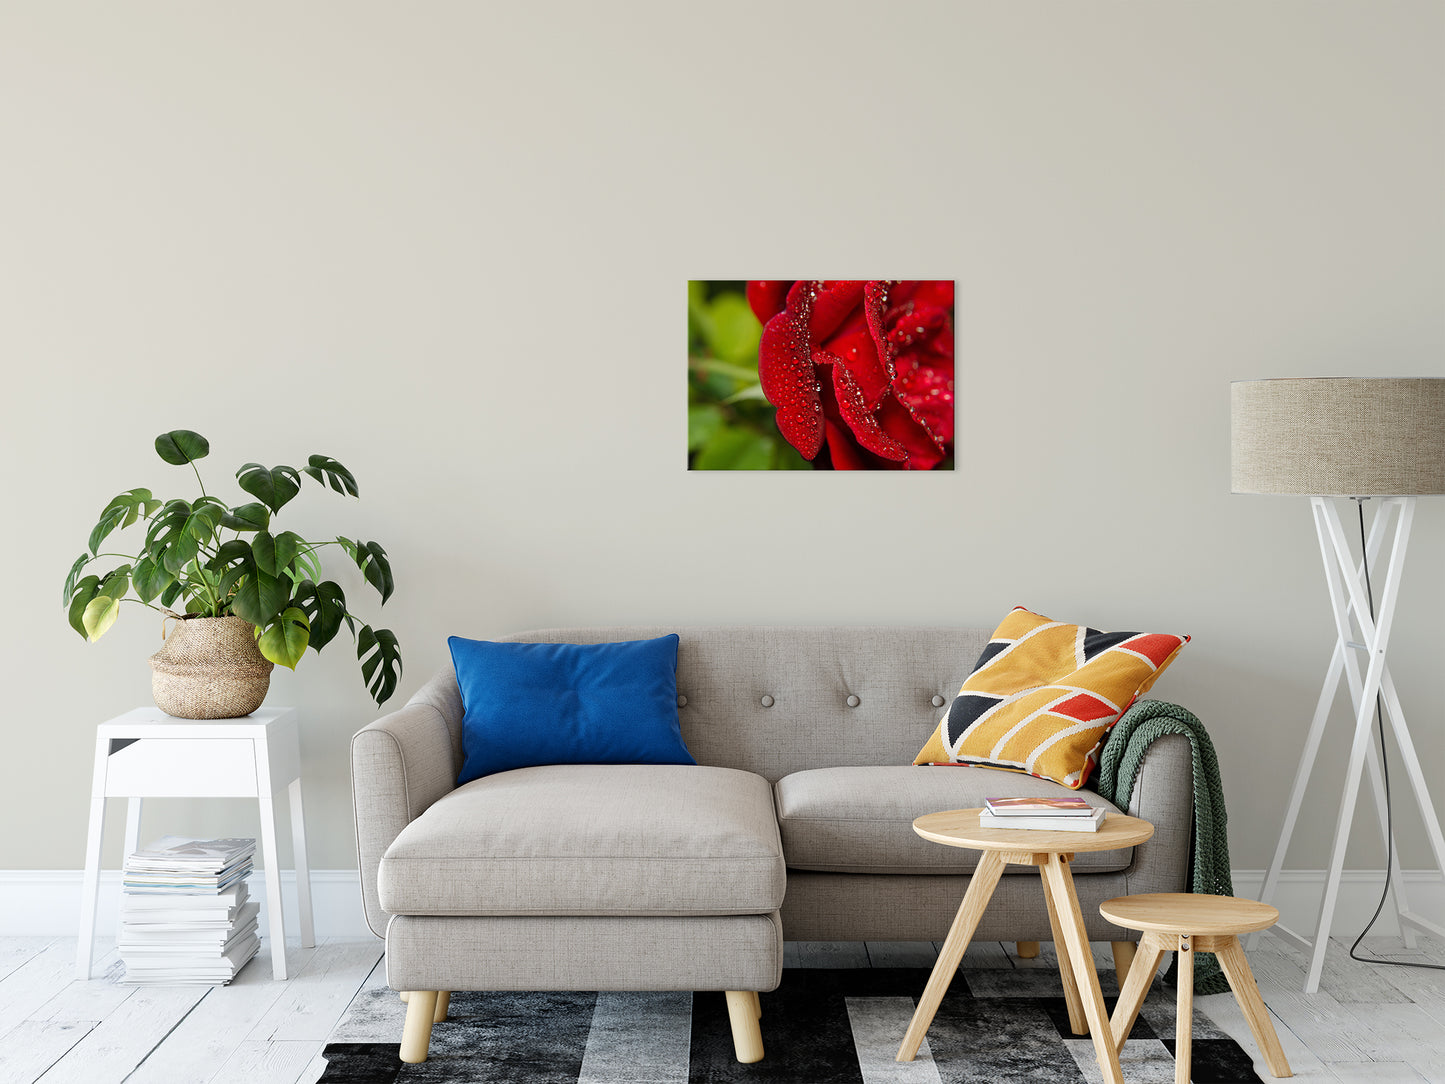 Bold and Beautiful Nature / Floral Photo Fine Art Canvas Wall Art Prints 20" x 24" - PIPAFINEART